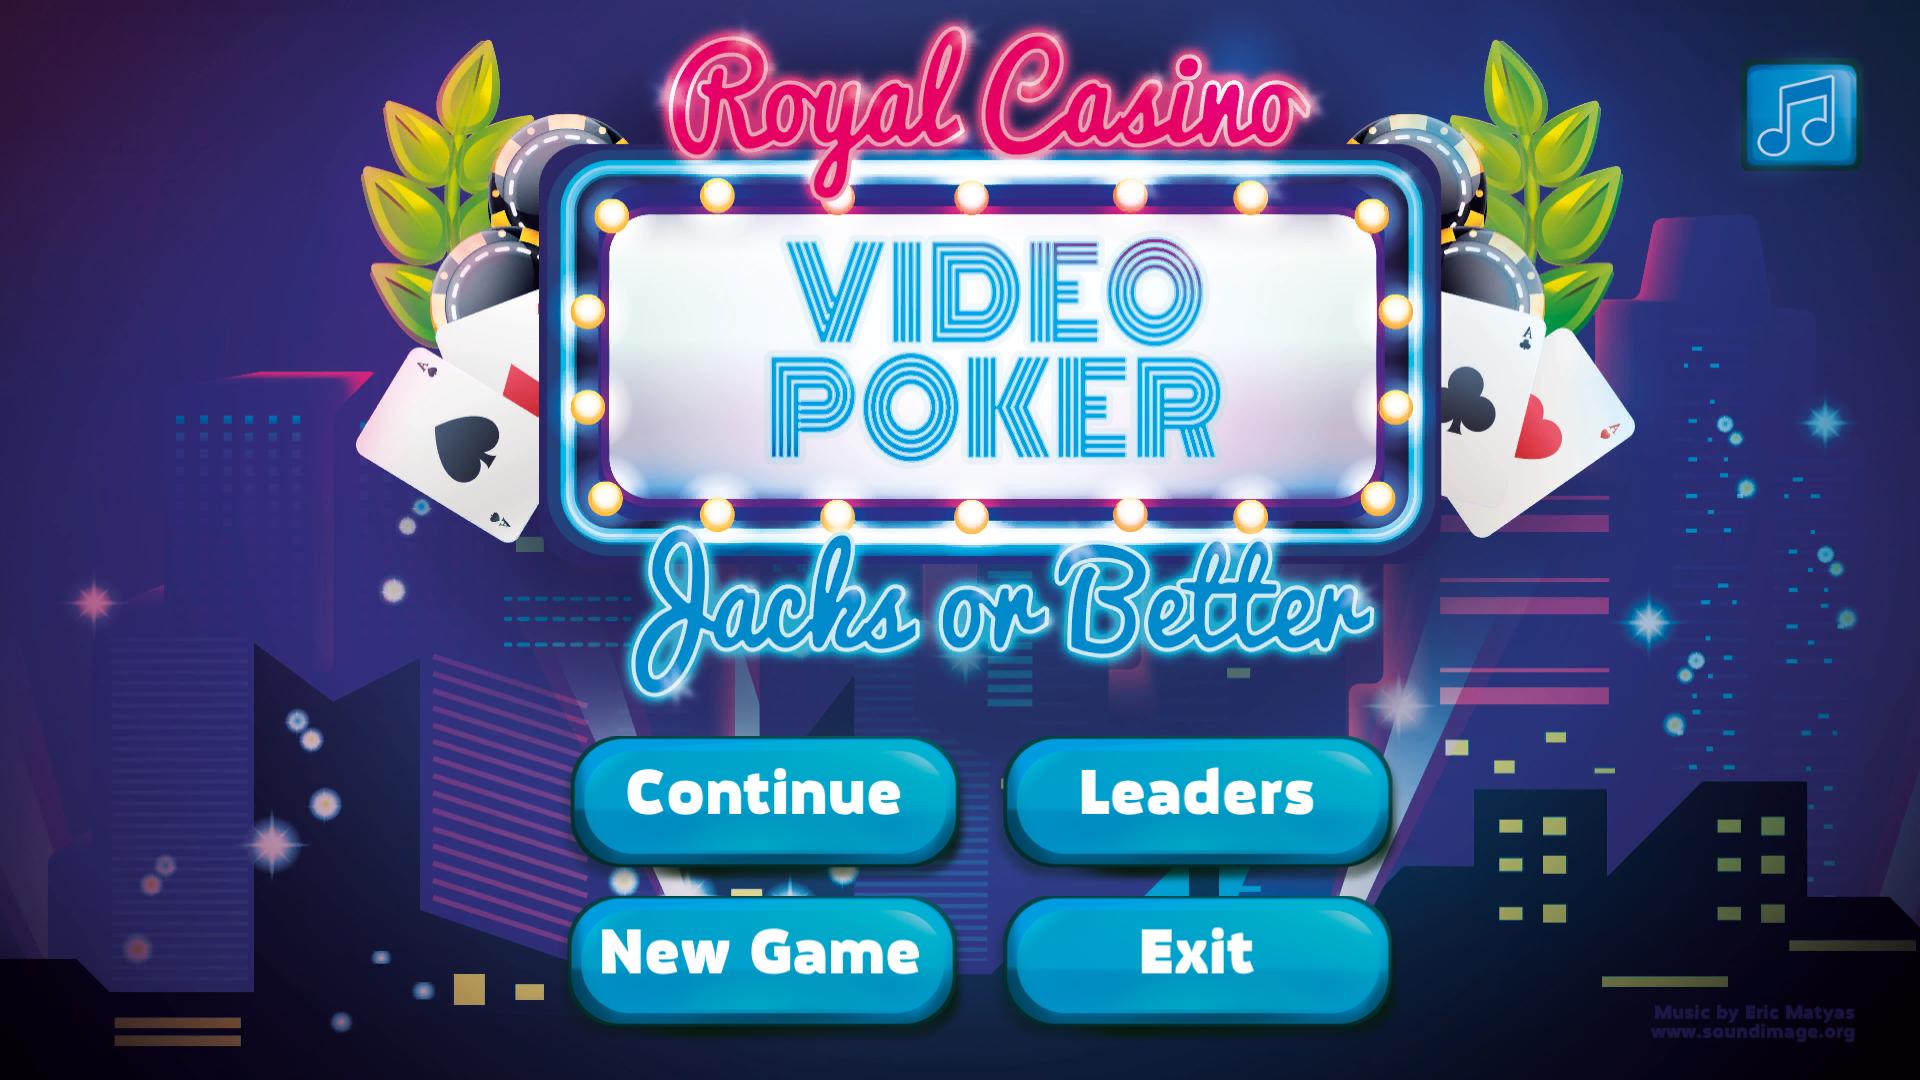 casino royale game online free play